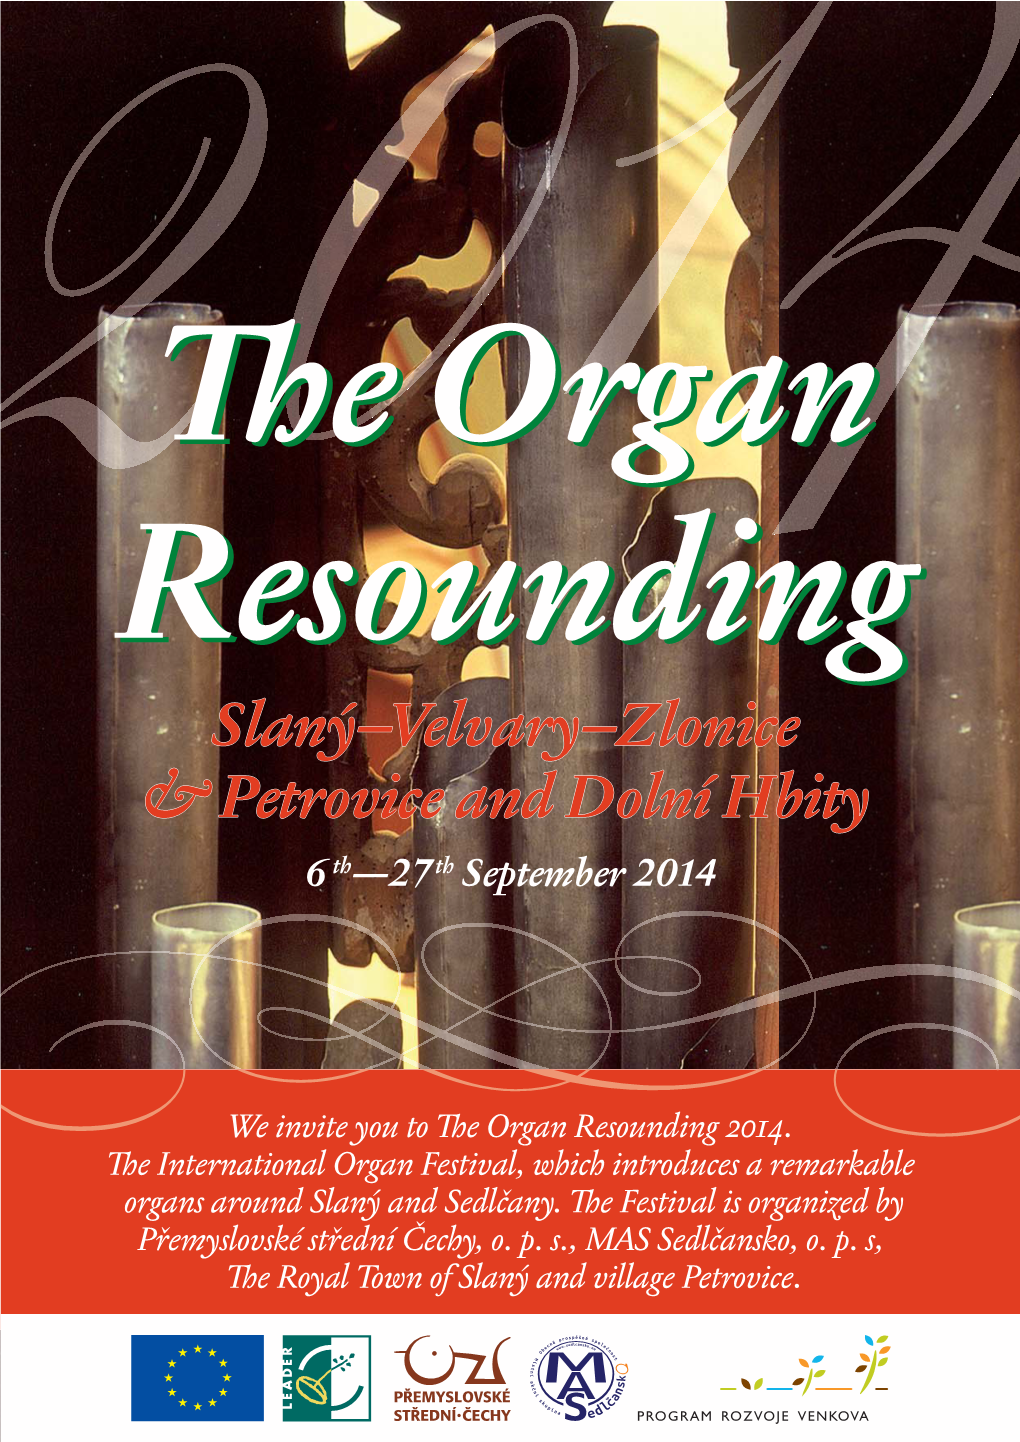 About the Organ Resounding Festival